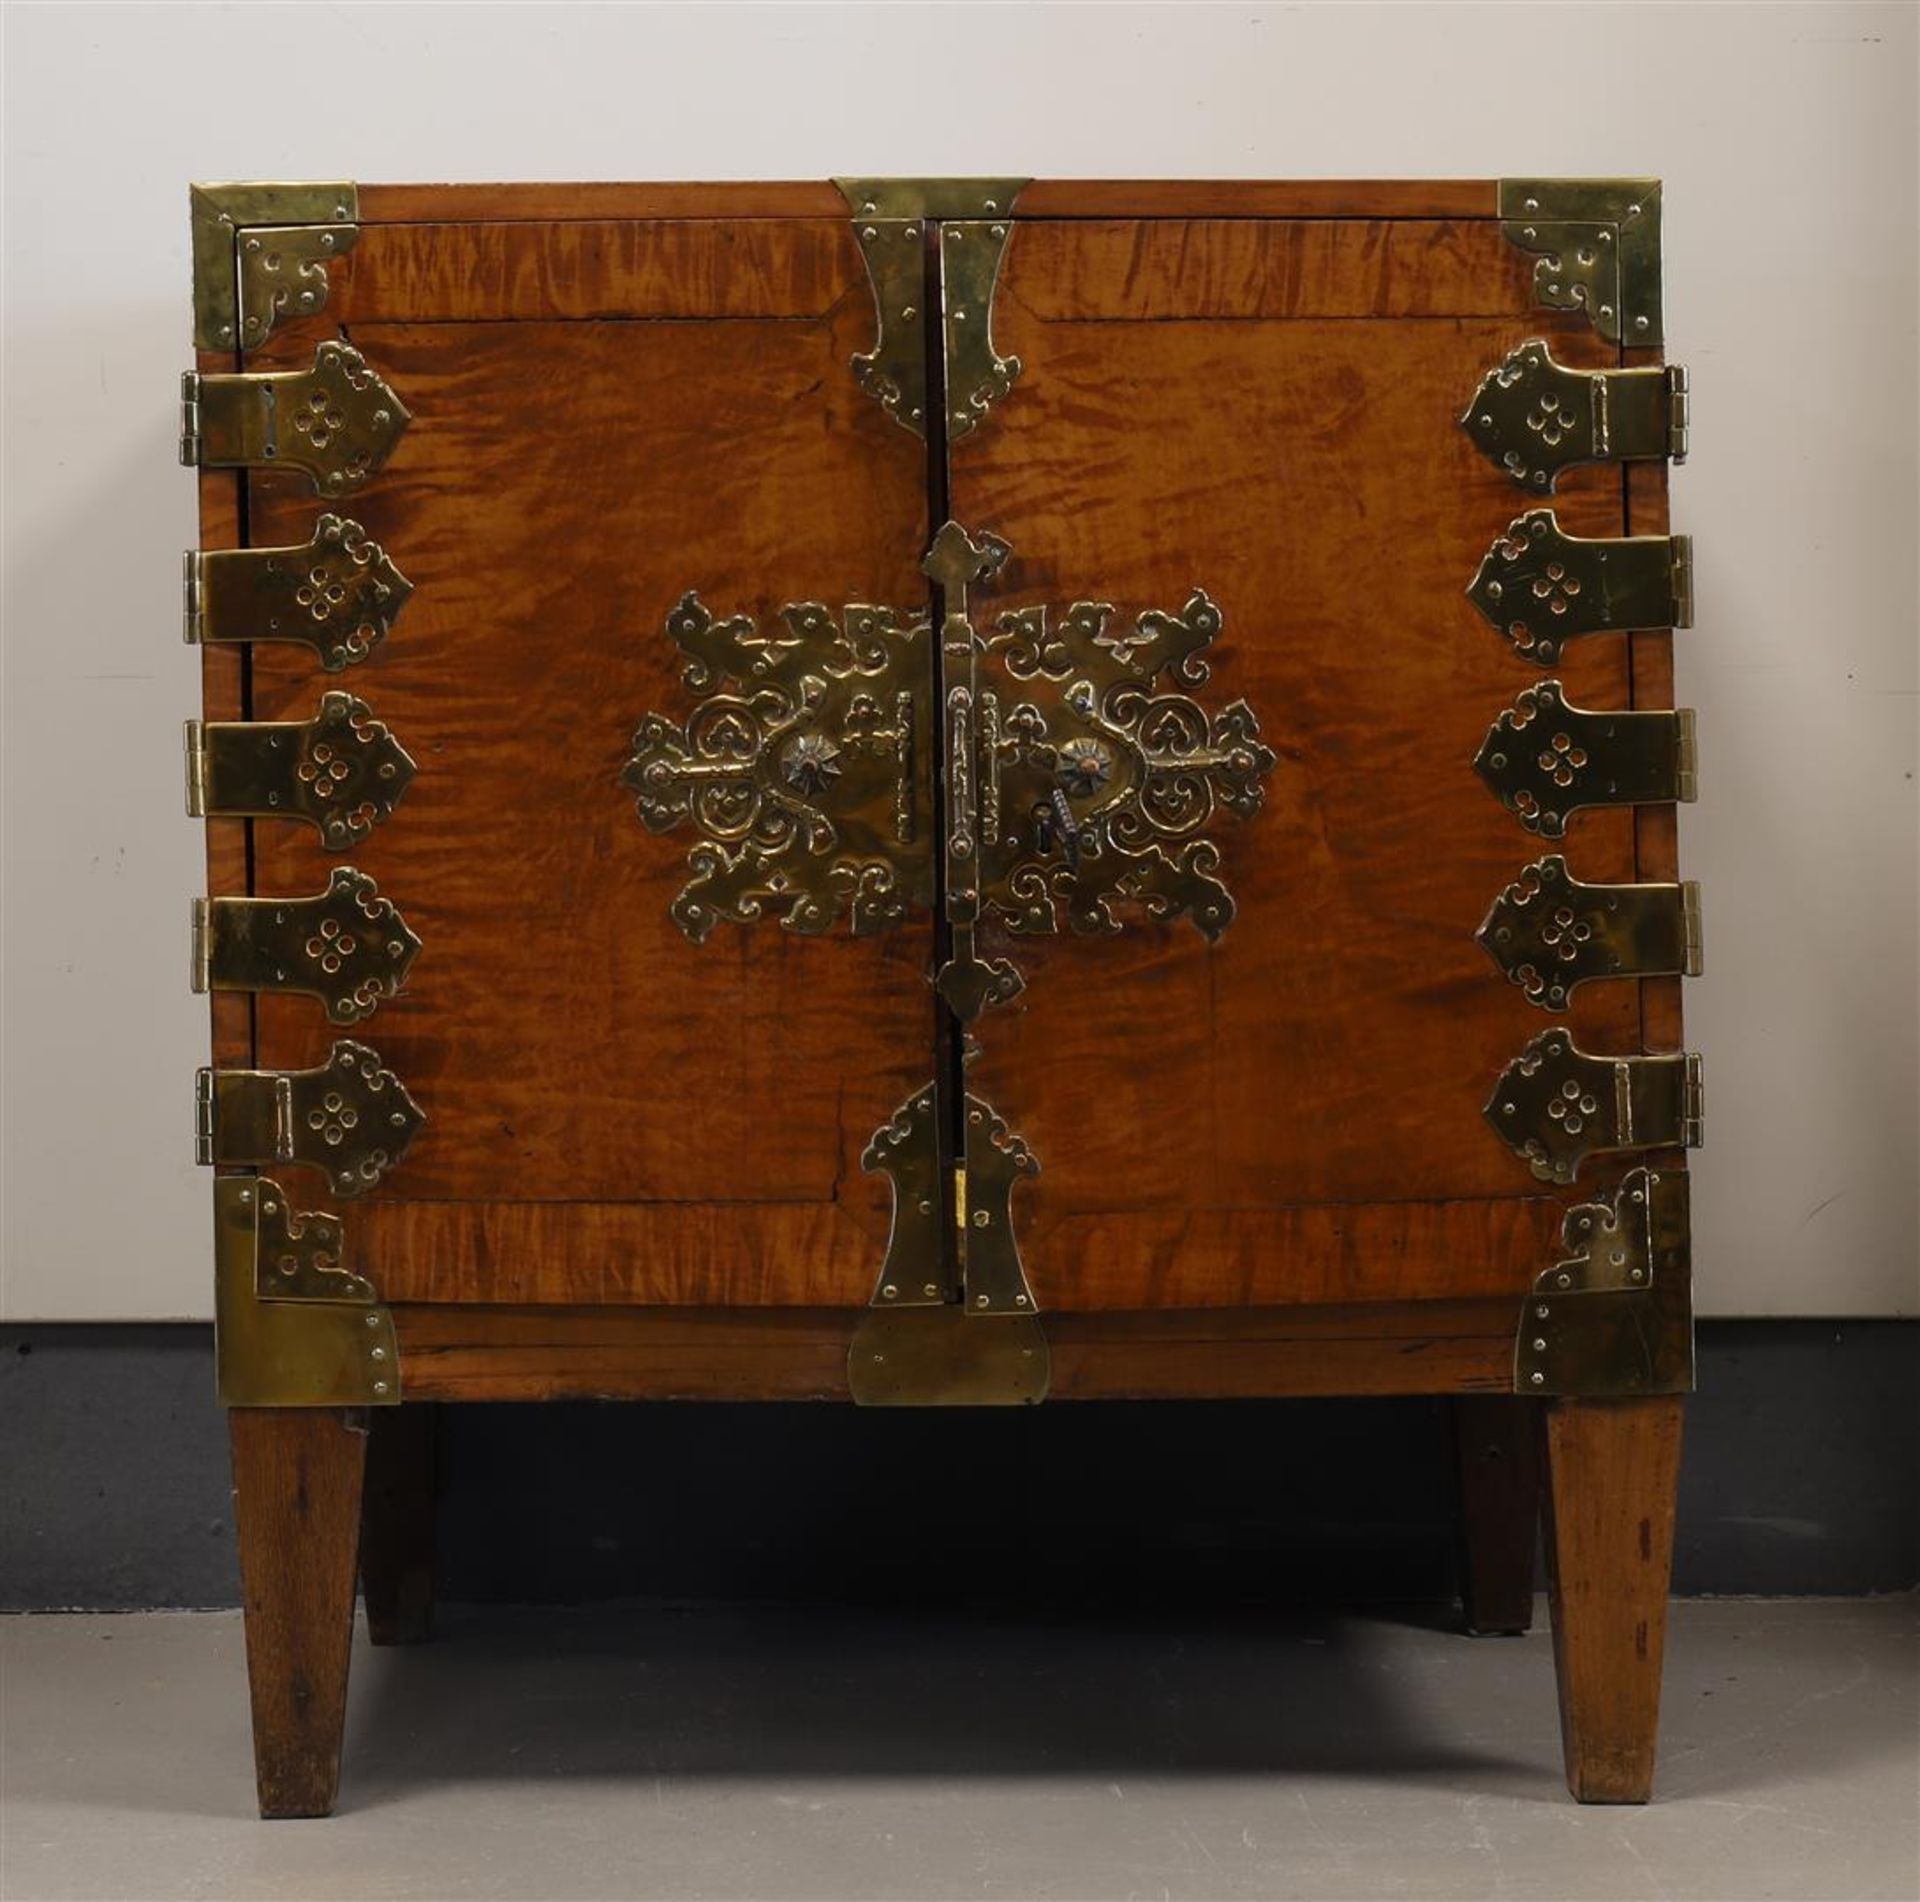 A two-door art cabinet, colonial 17th century. Walnut, two doors with brass fittings, behind them